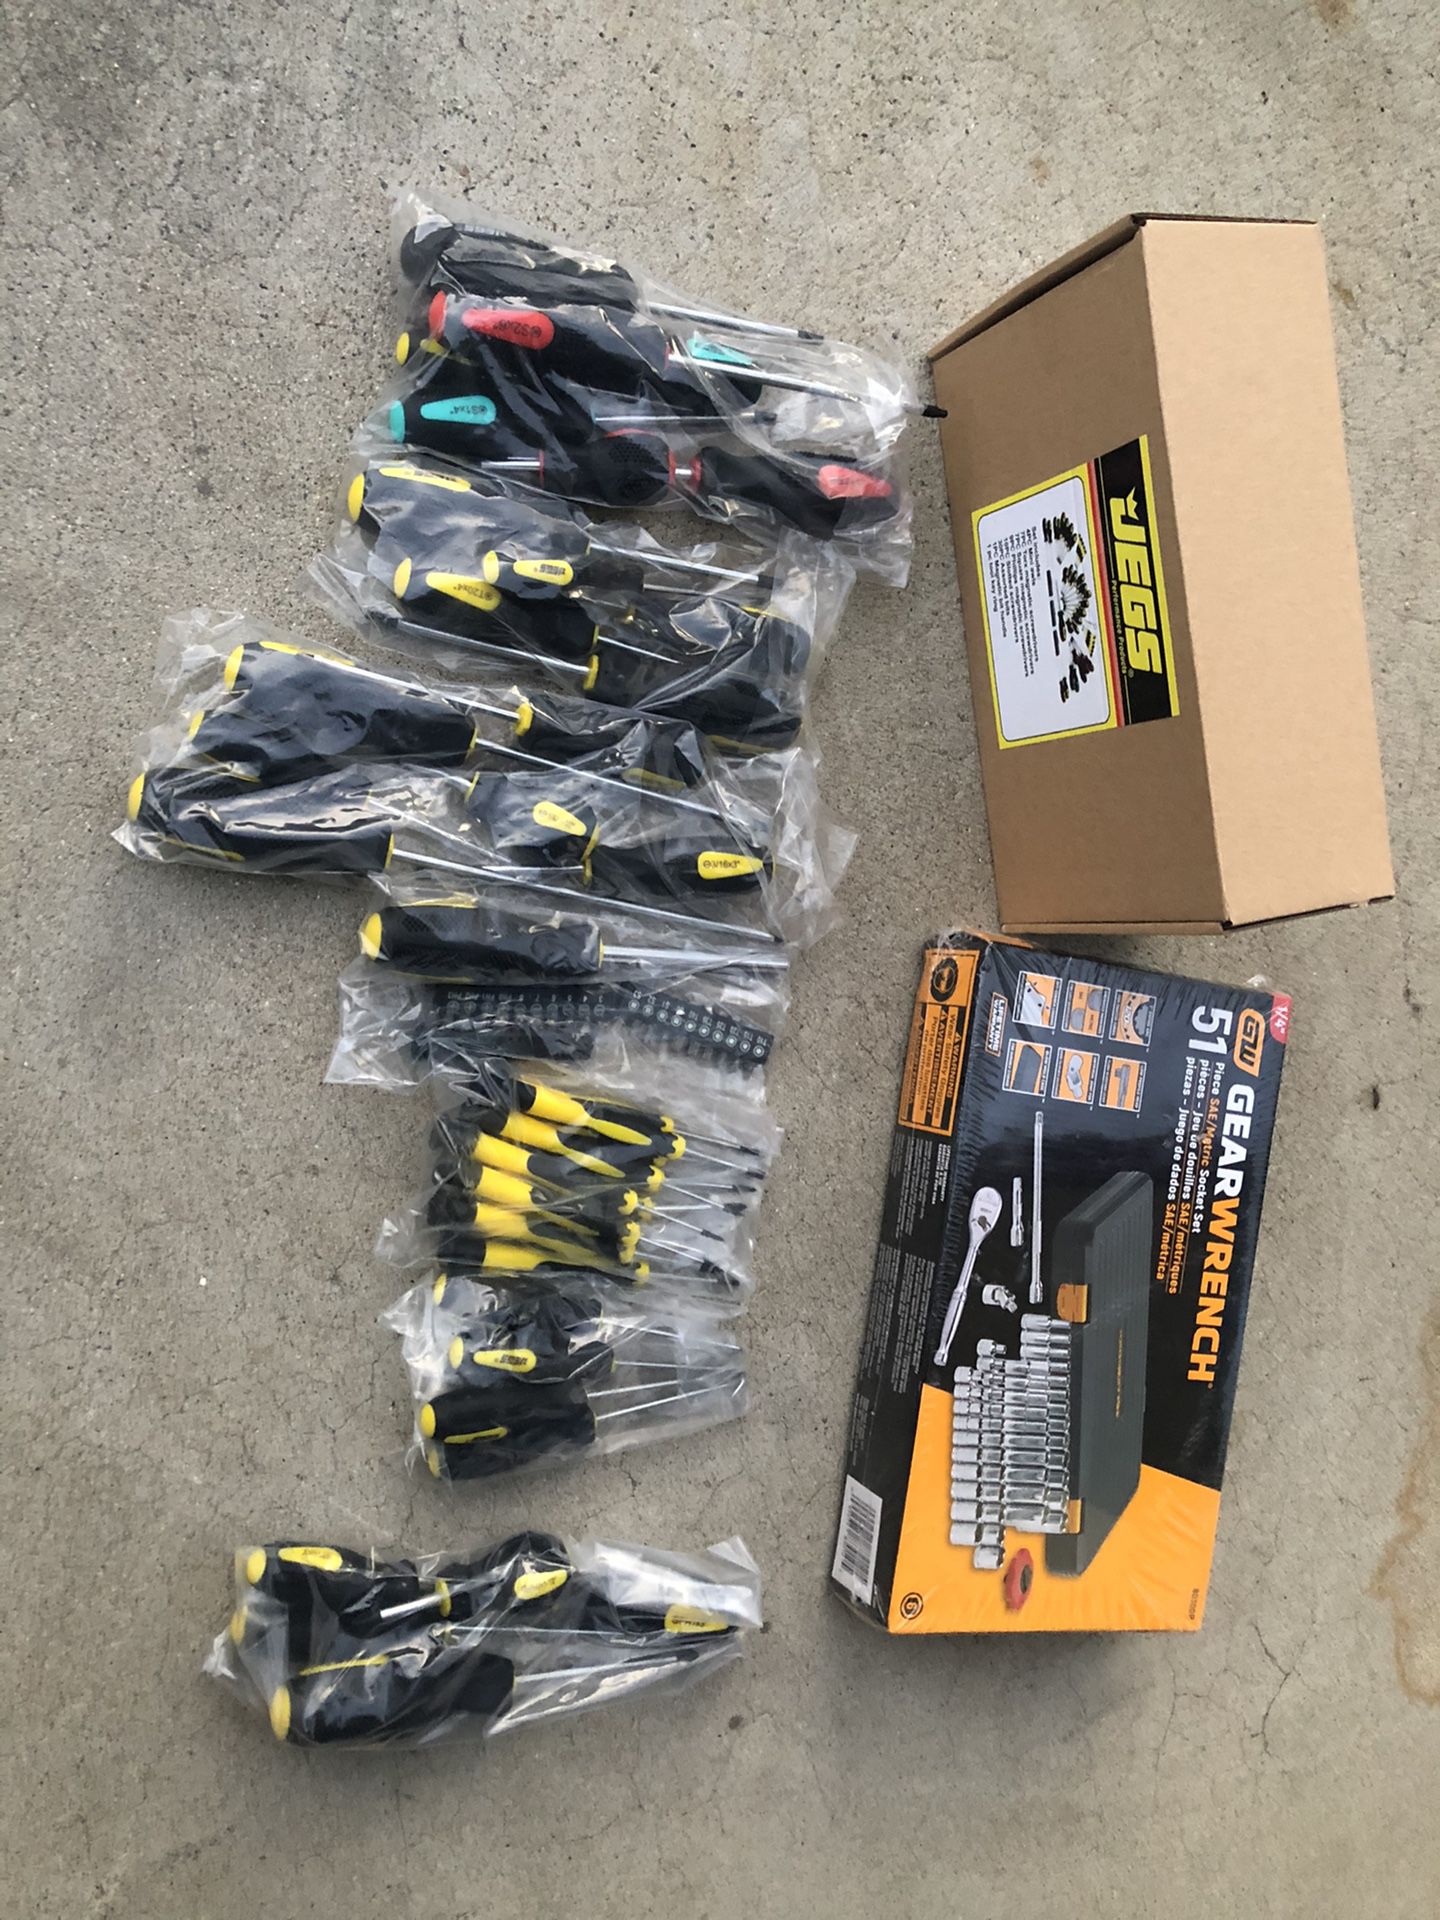 New Tools , gear wrench set and Screwdriver set